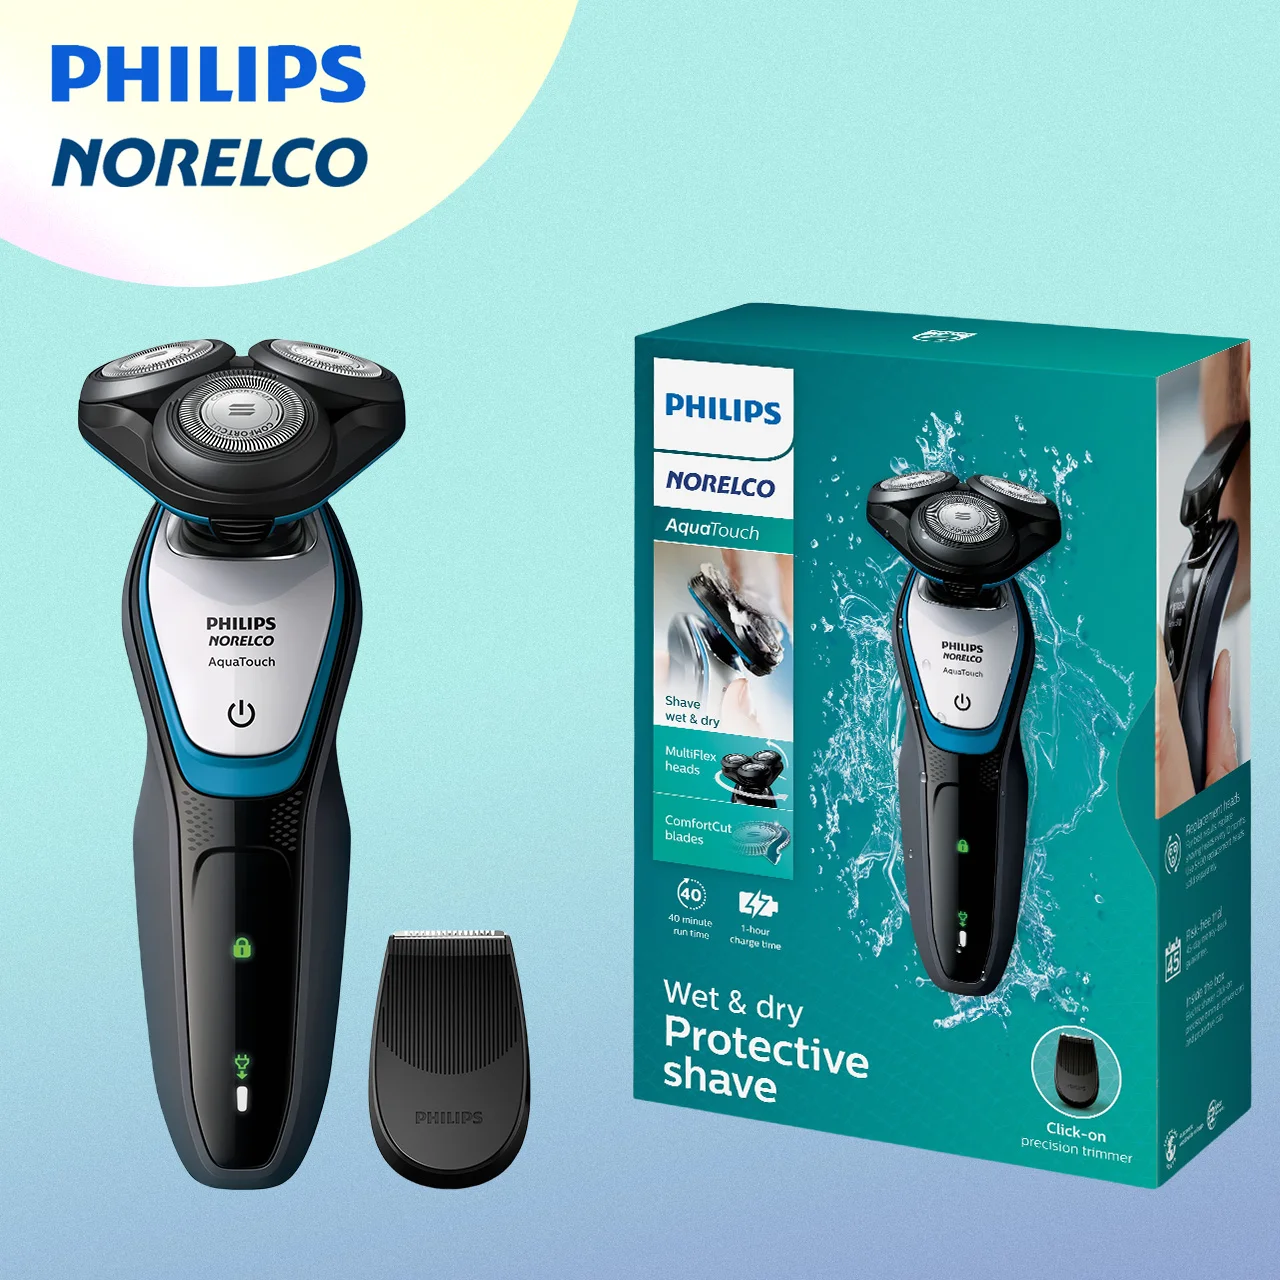 

Philips Norelco Electric Shaver series 5000 S5090, Wet & dry, electric rotation shaver for men, Black